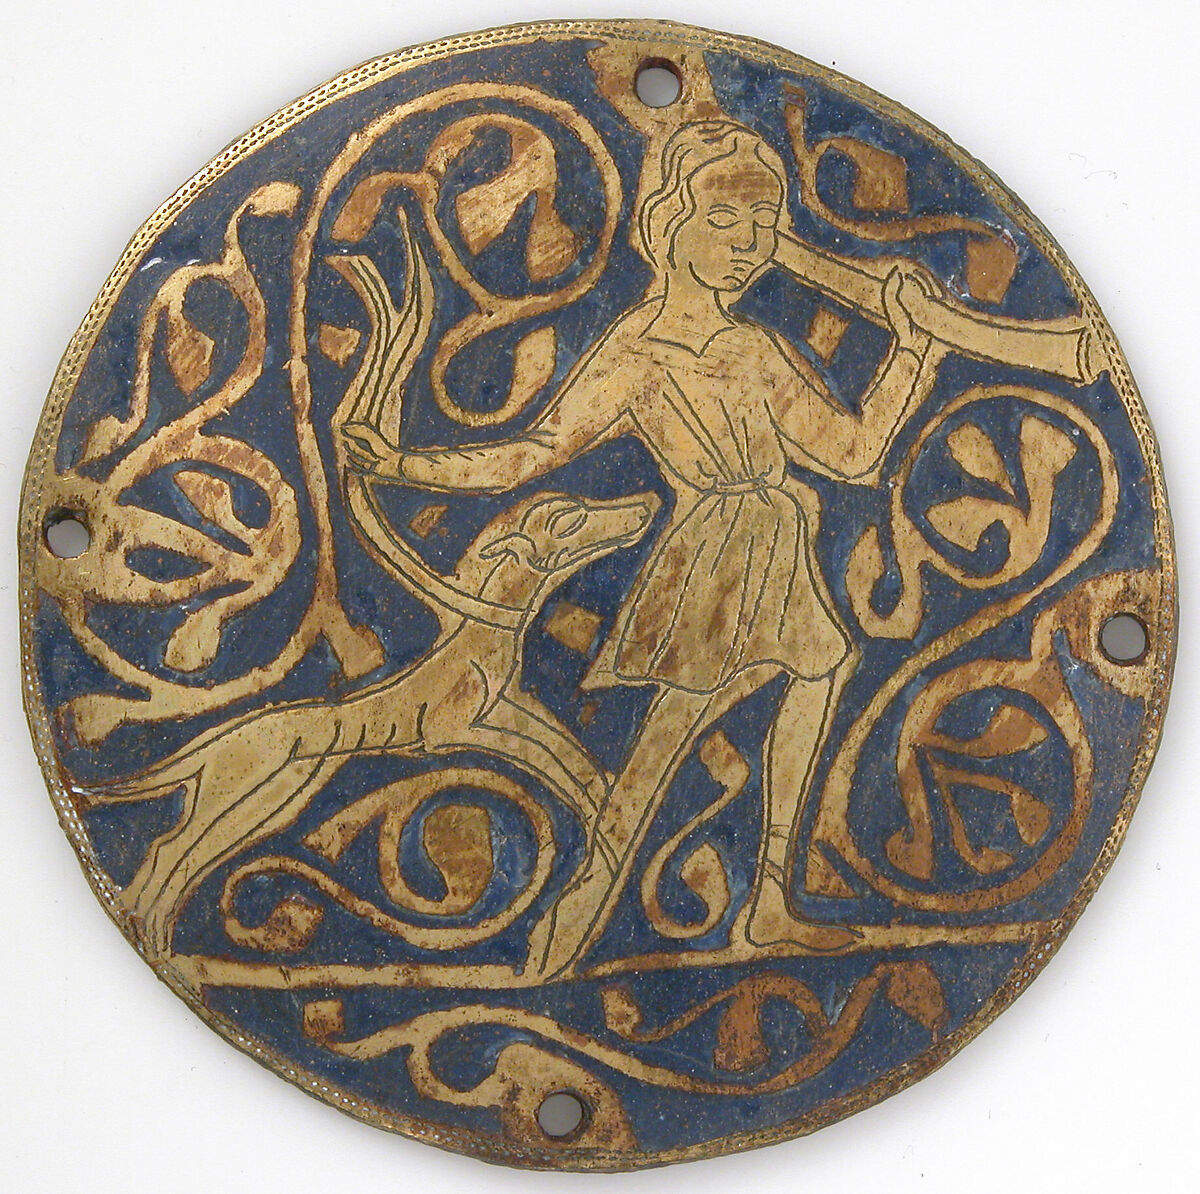 Medallion with Varlet with Horn and Hound, Copper: engraved and gilt; champlevé enamel: medium and light blue and white, French 